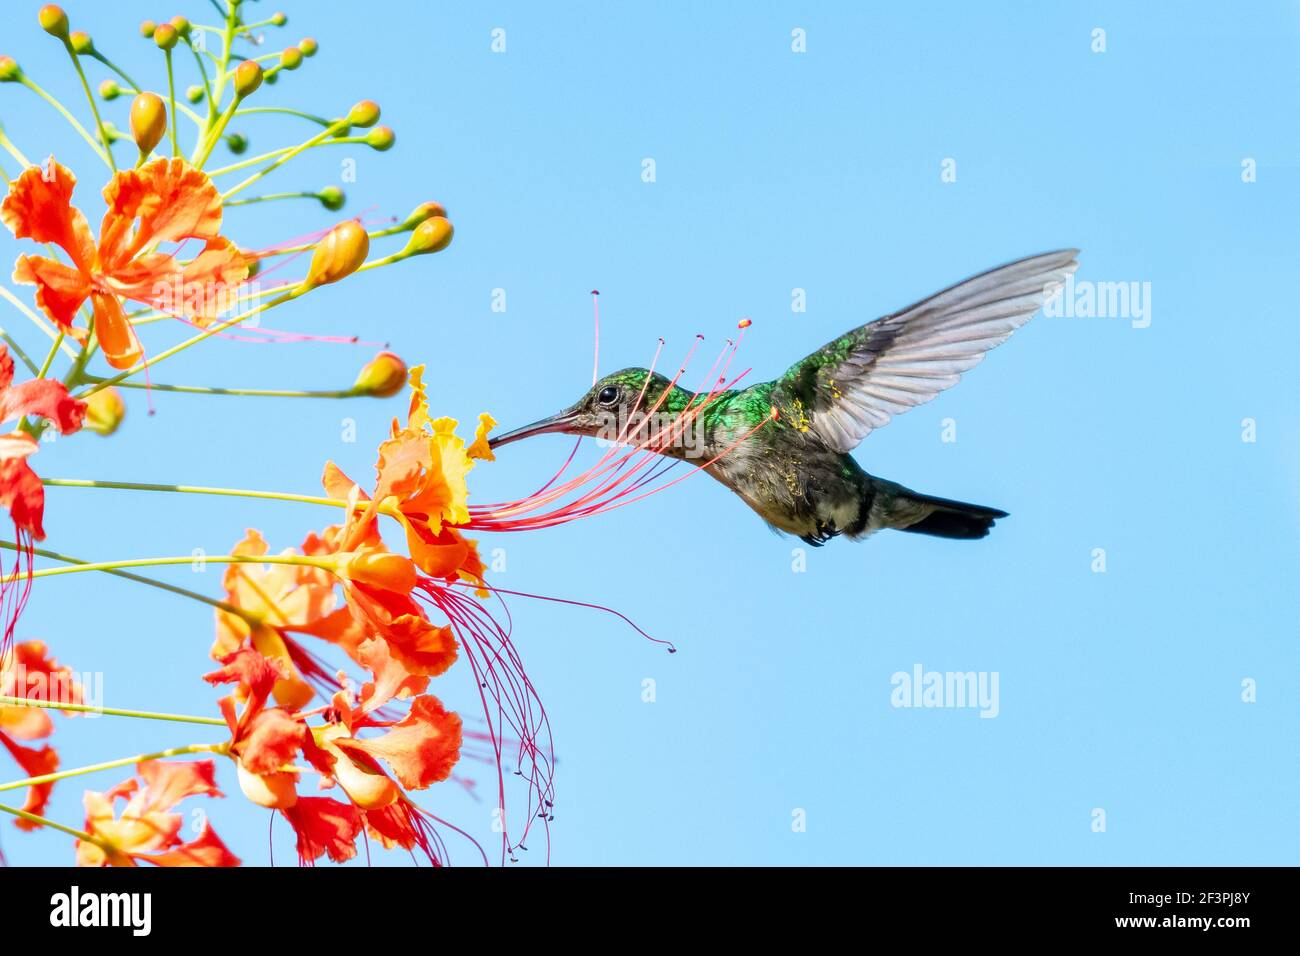 A Blue-chinned Sapphire hummingbird (Chlorestes notata) feeding on the Pride of Barbados flower with a blue background. Stock Photo